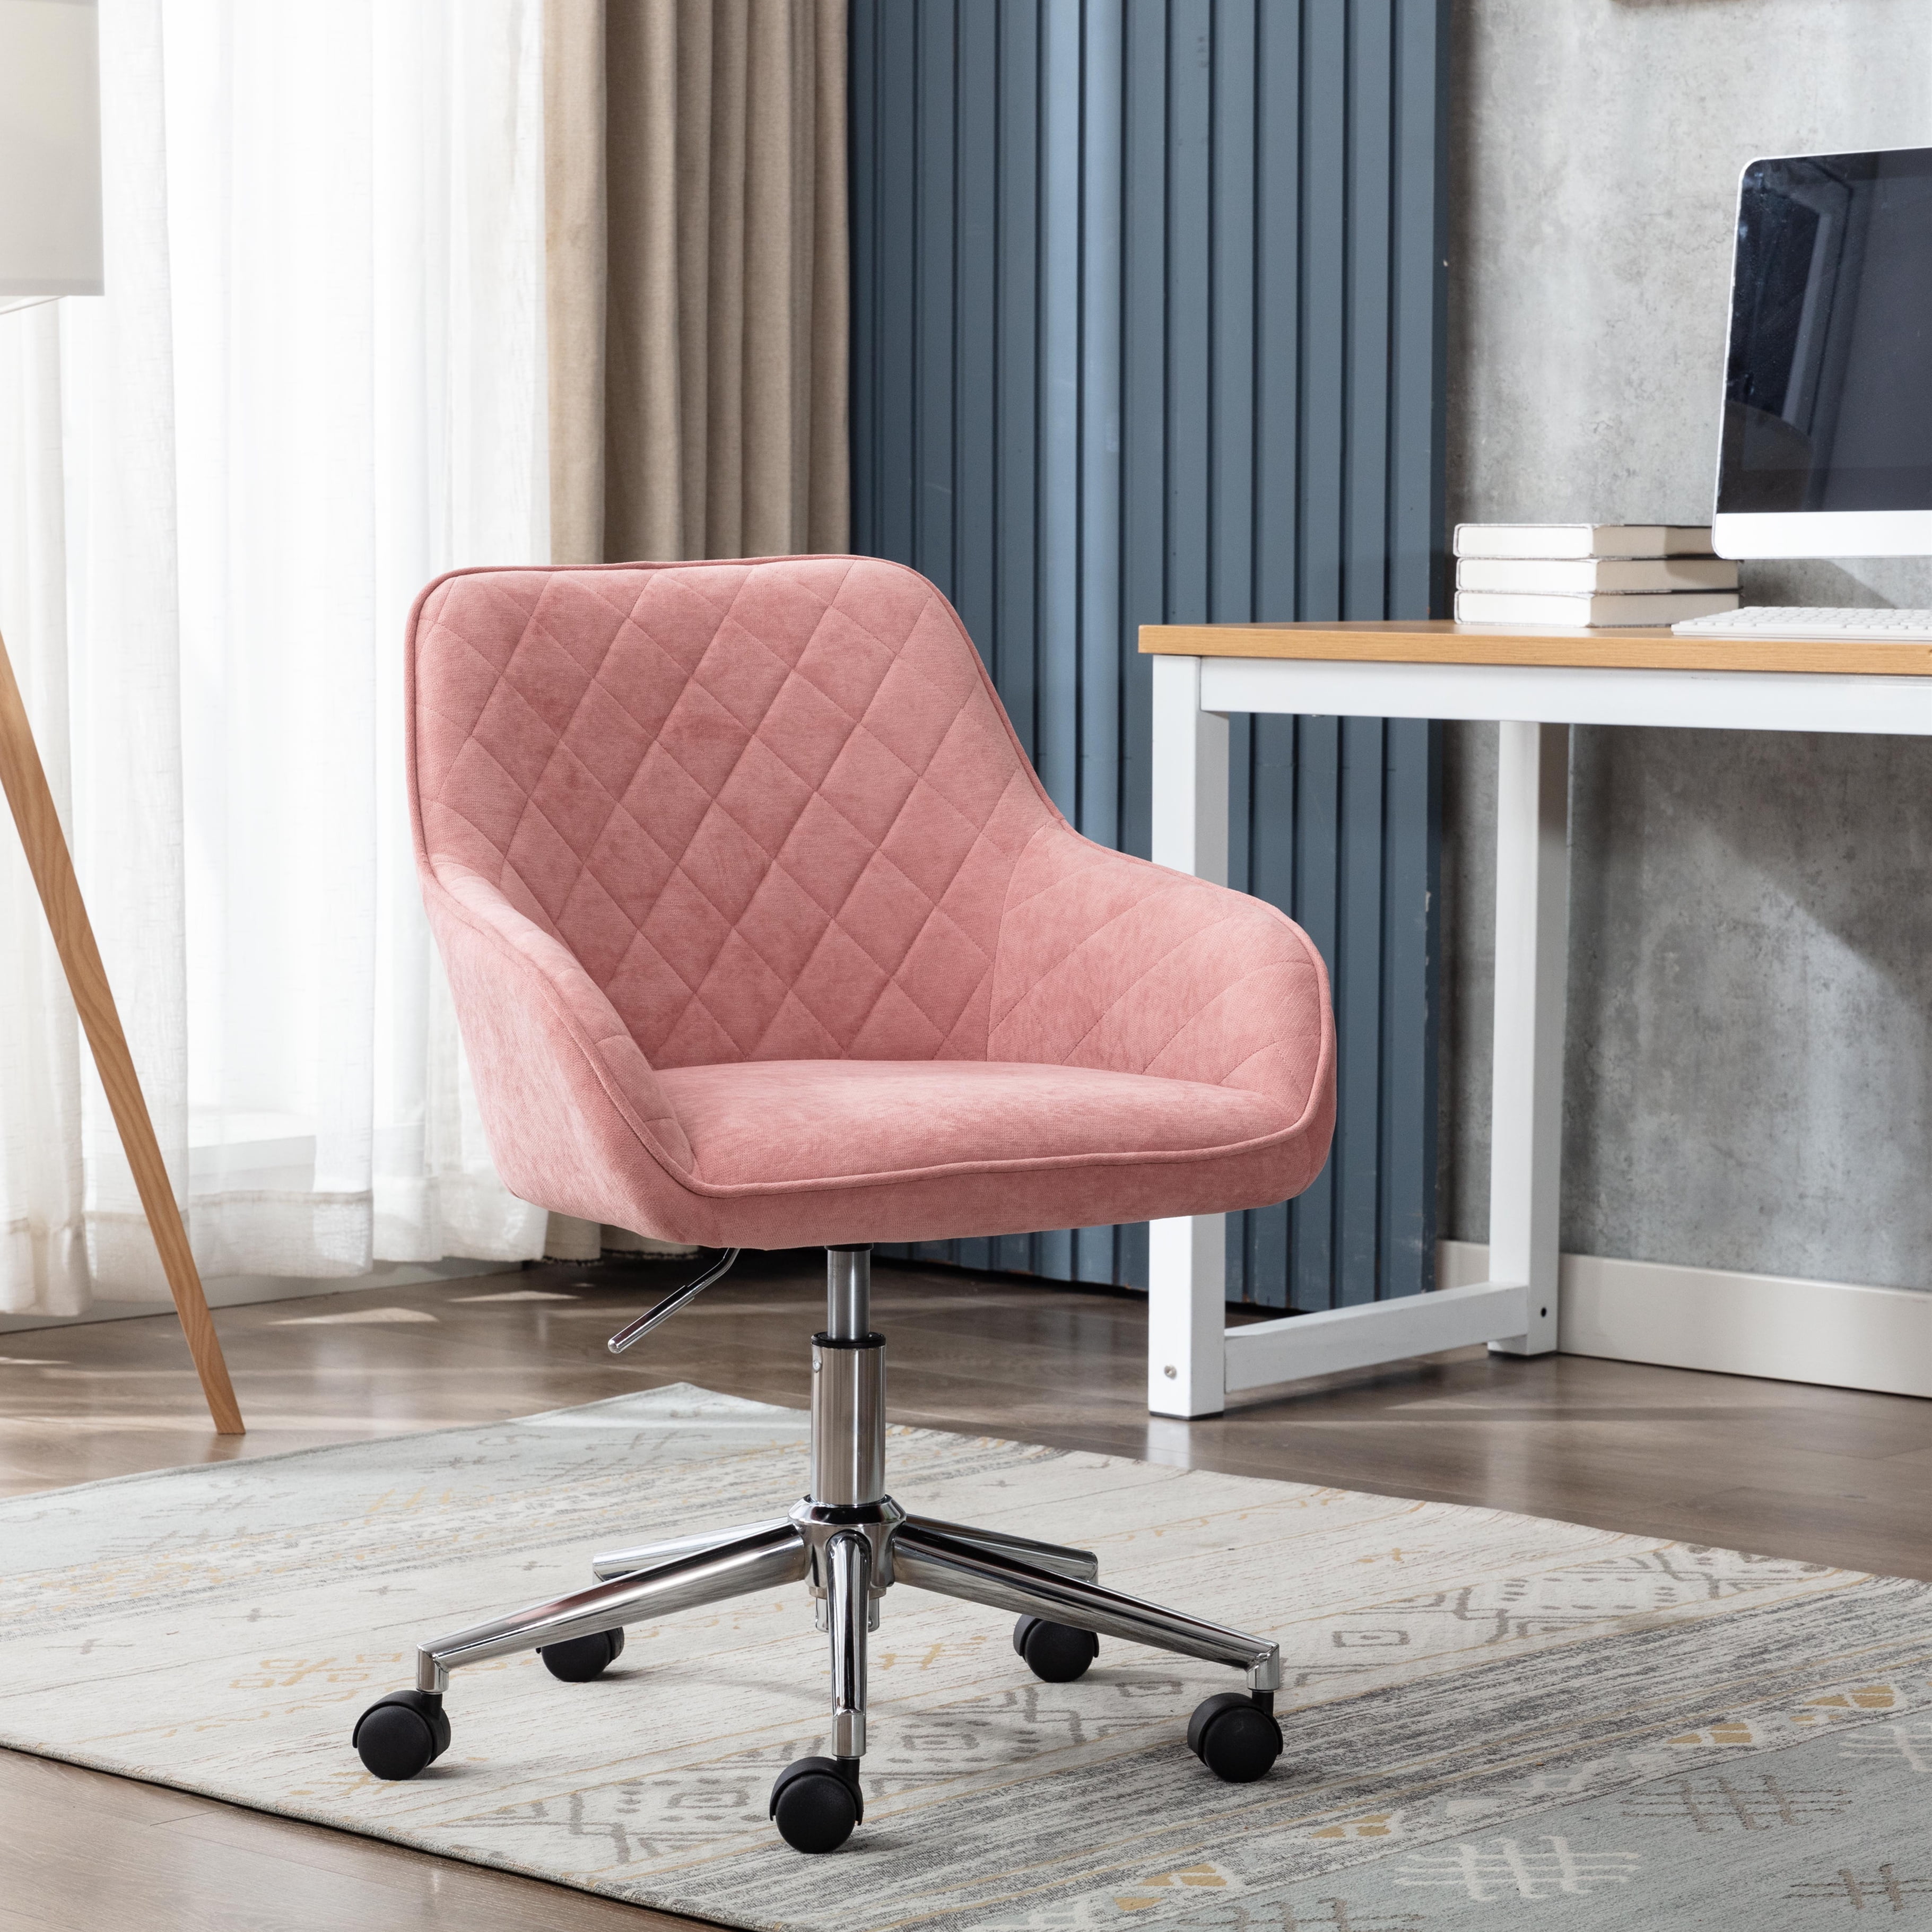 Details about   High-Back Office Chair Desk Chair Swivel Lift Adjustable Computer Chairs Pink 